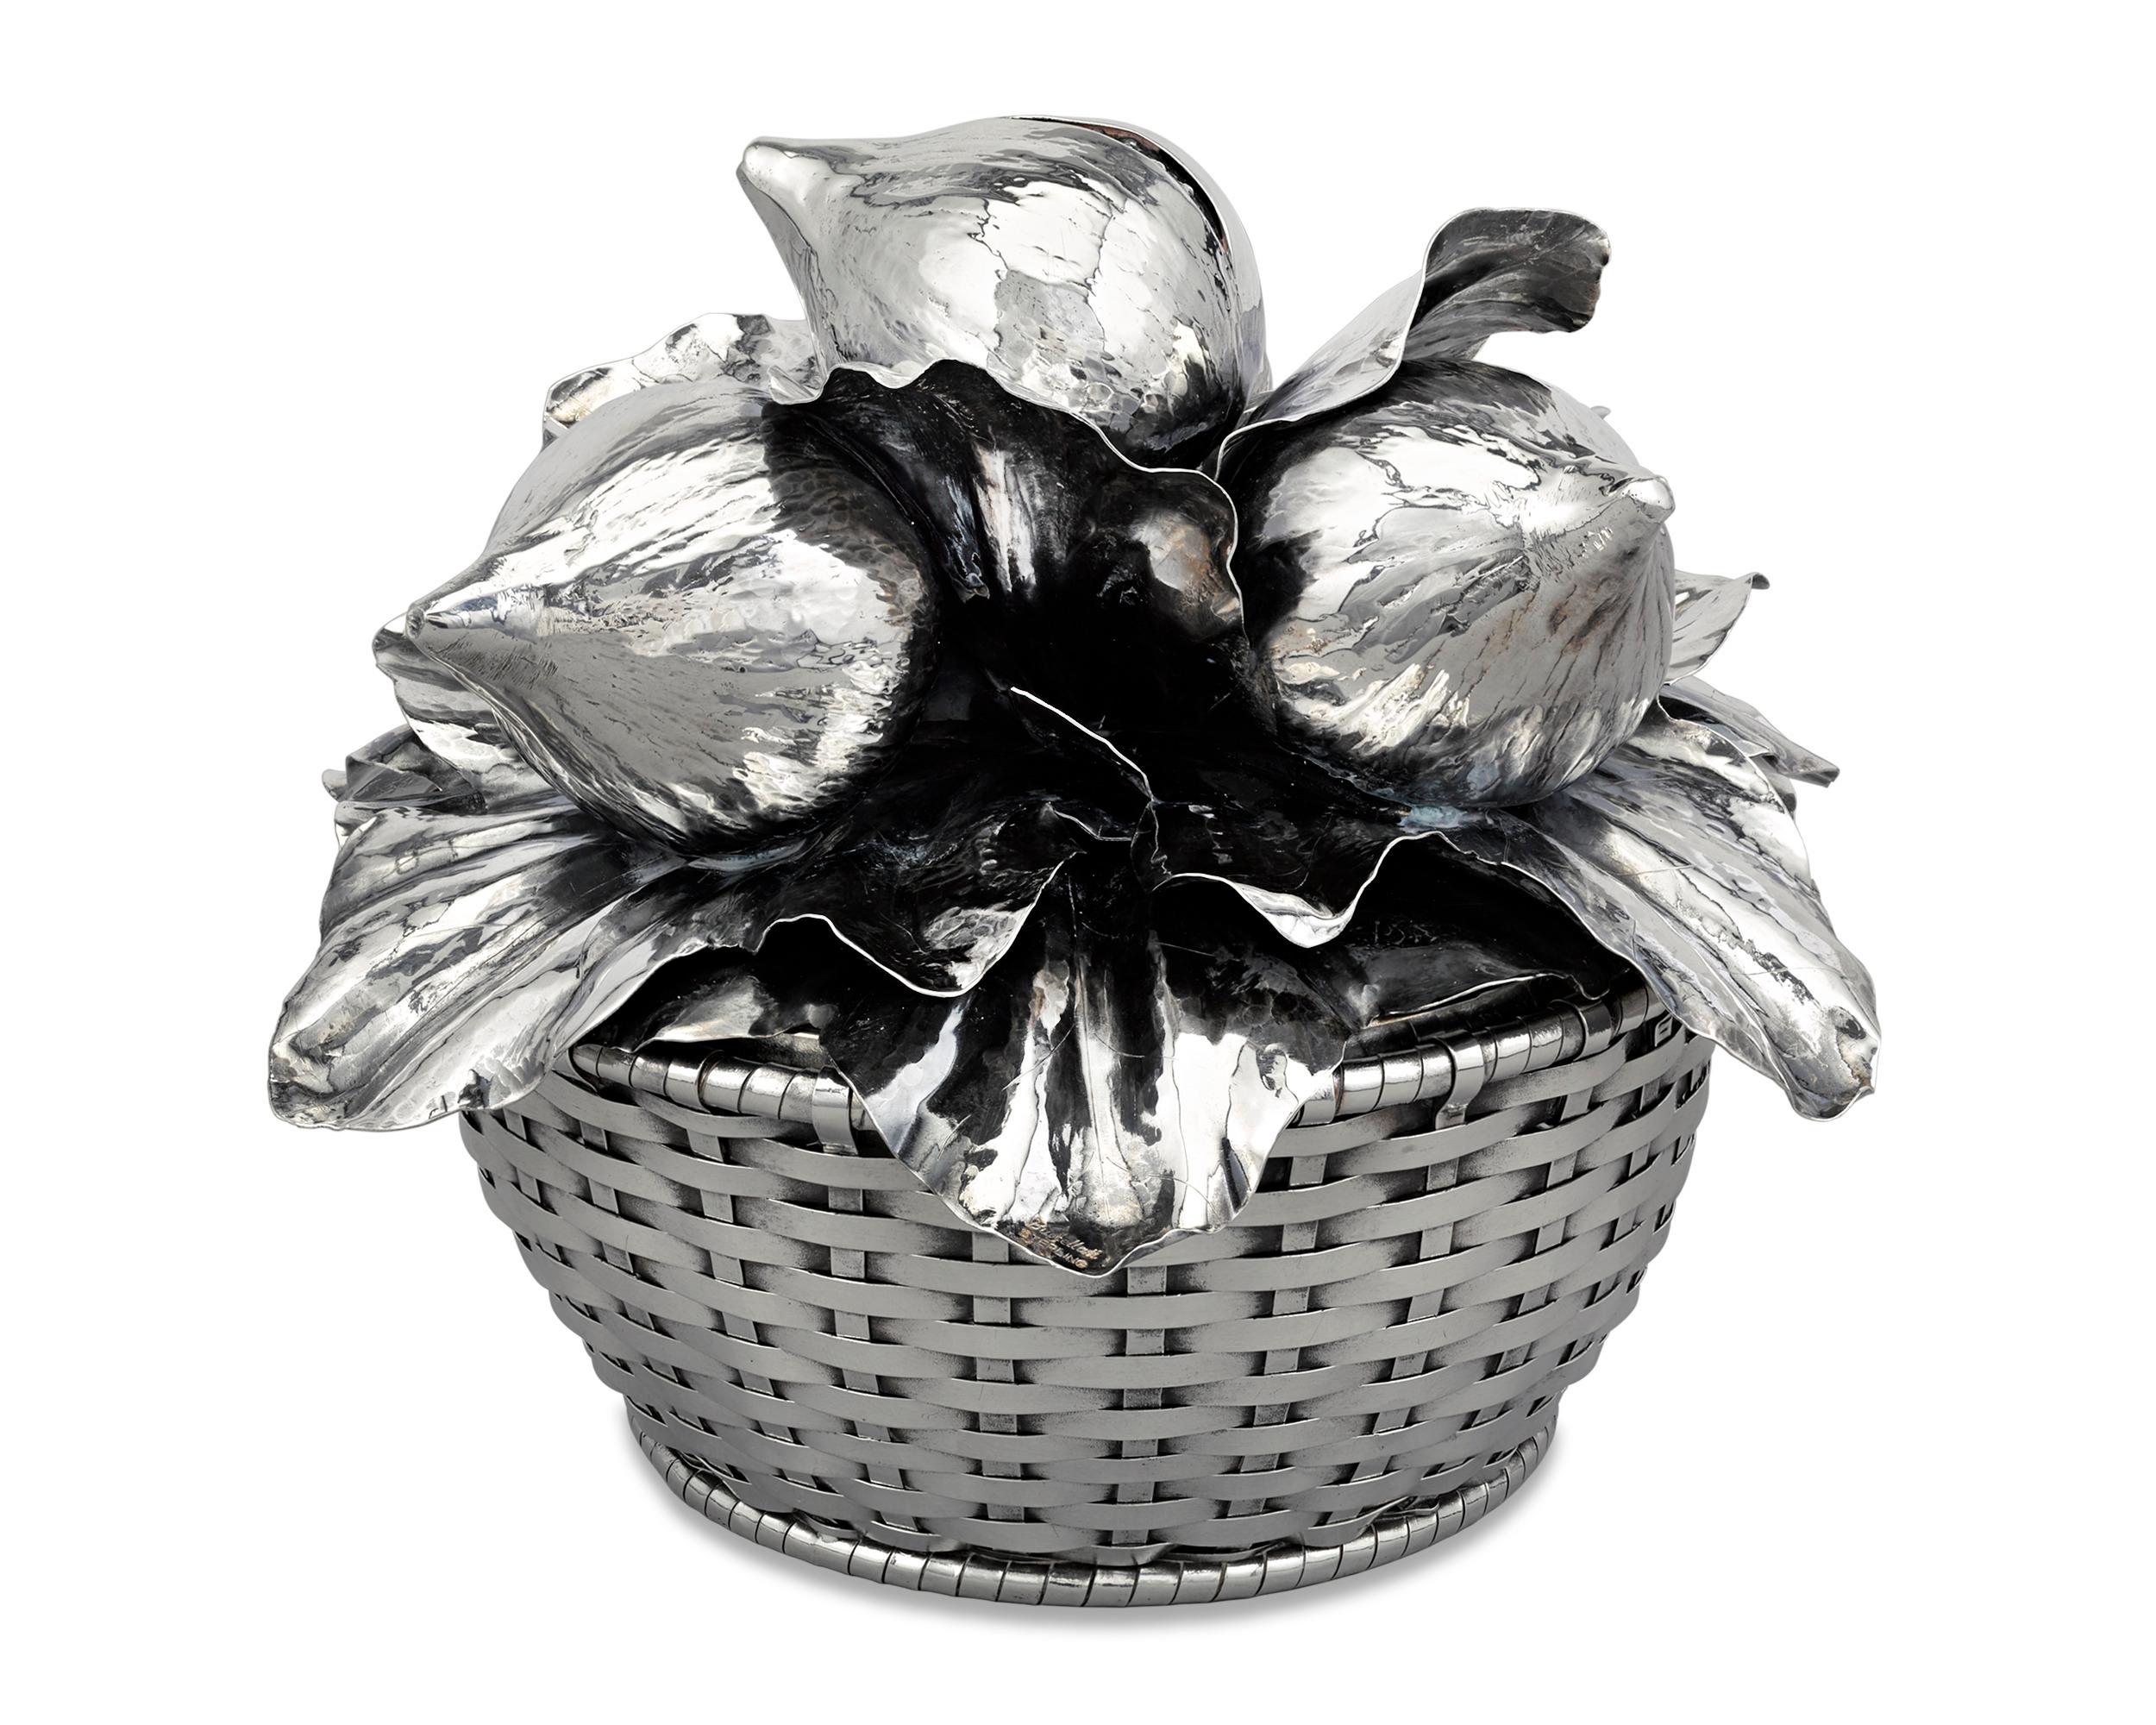 A ripe bunch of figs rest upon a bed of leaves in this exquisite silver basket centerpiece by Buccellati of Milan. Known for its innovative designs in an array of luxury goods, the Italian firm presents a truly marvelous specimen of silver artistry